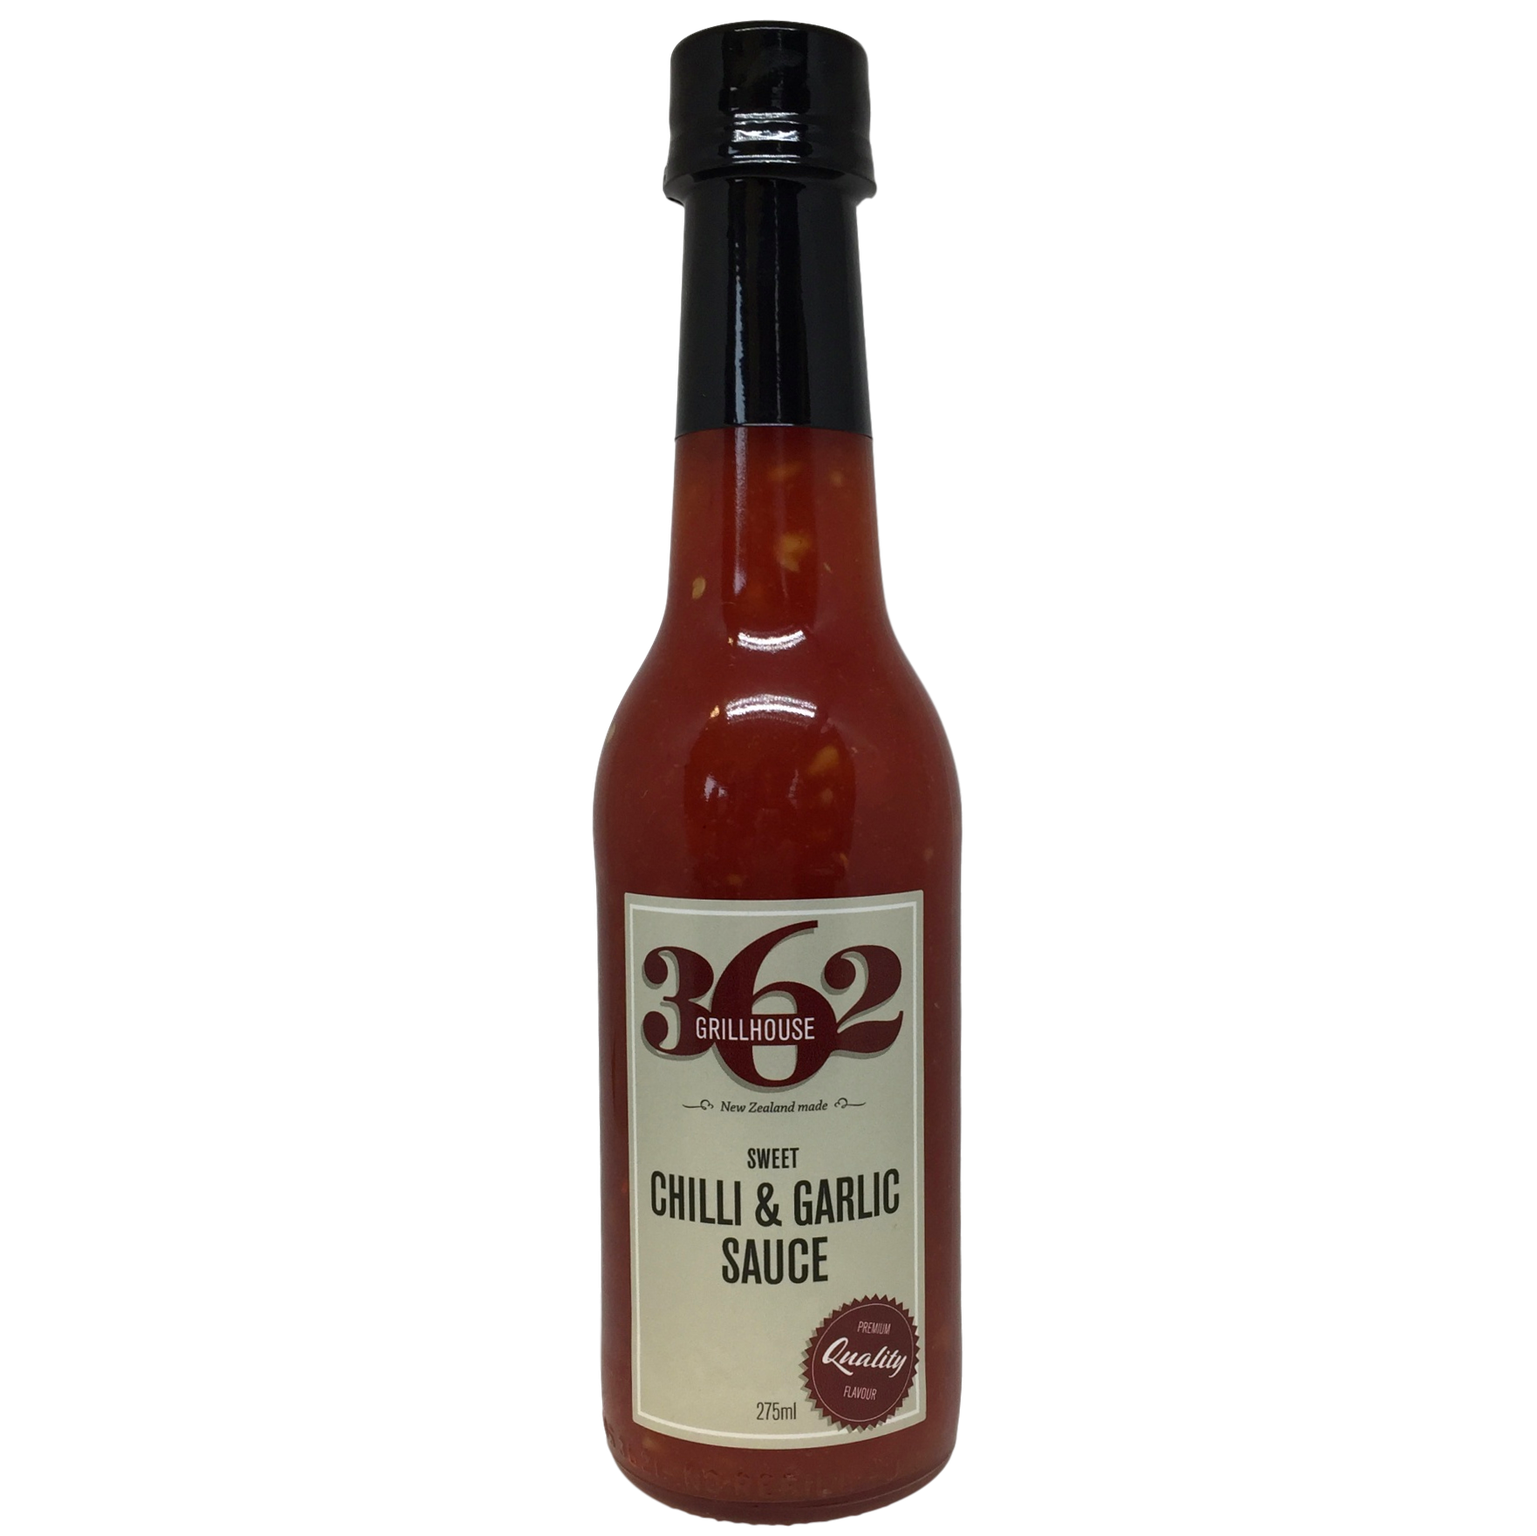 362 Grillhouse - Sweet Chilli and Garlic Sauce